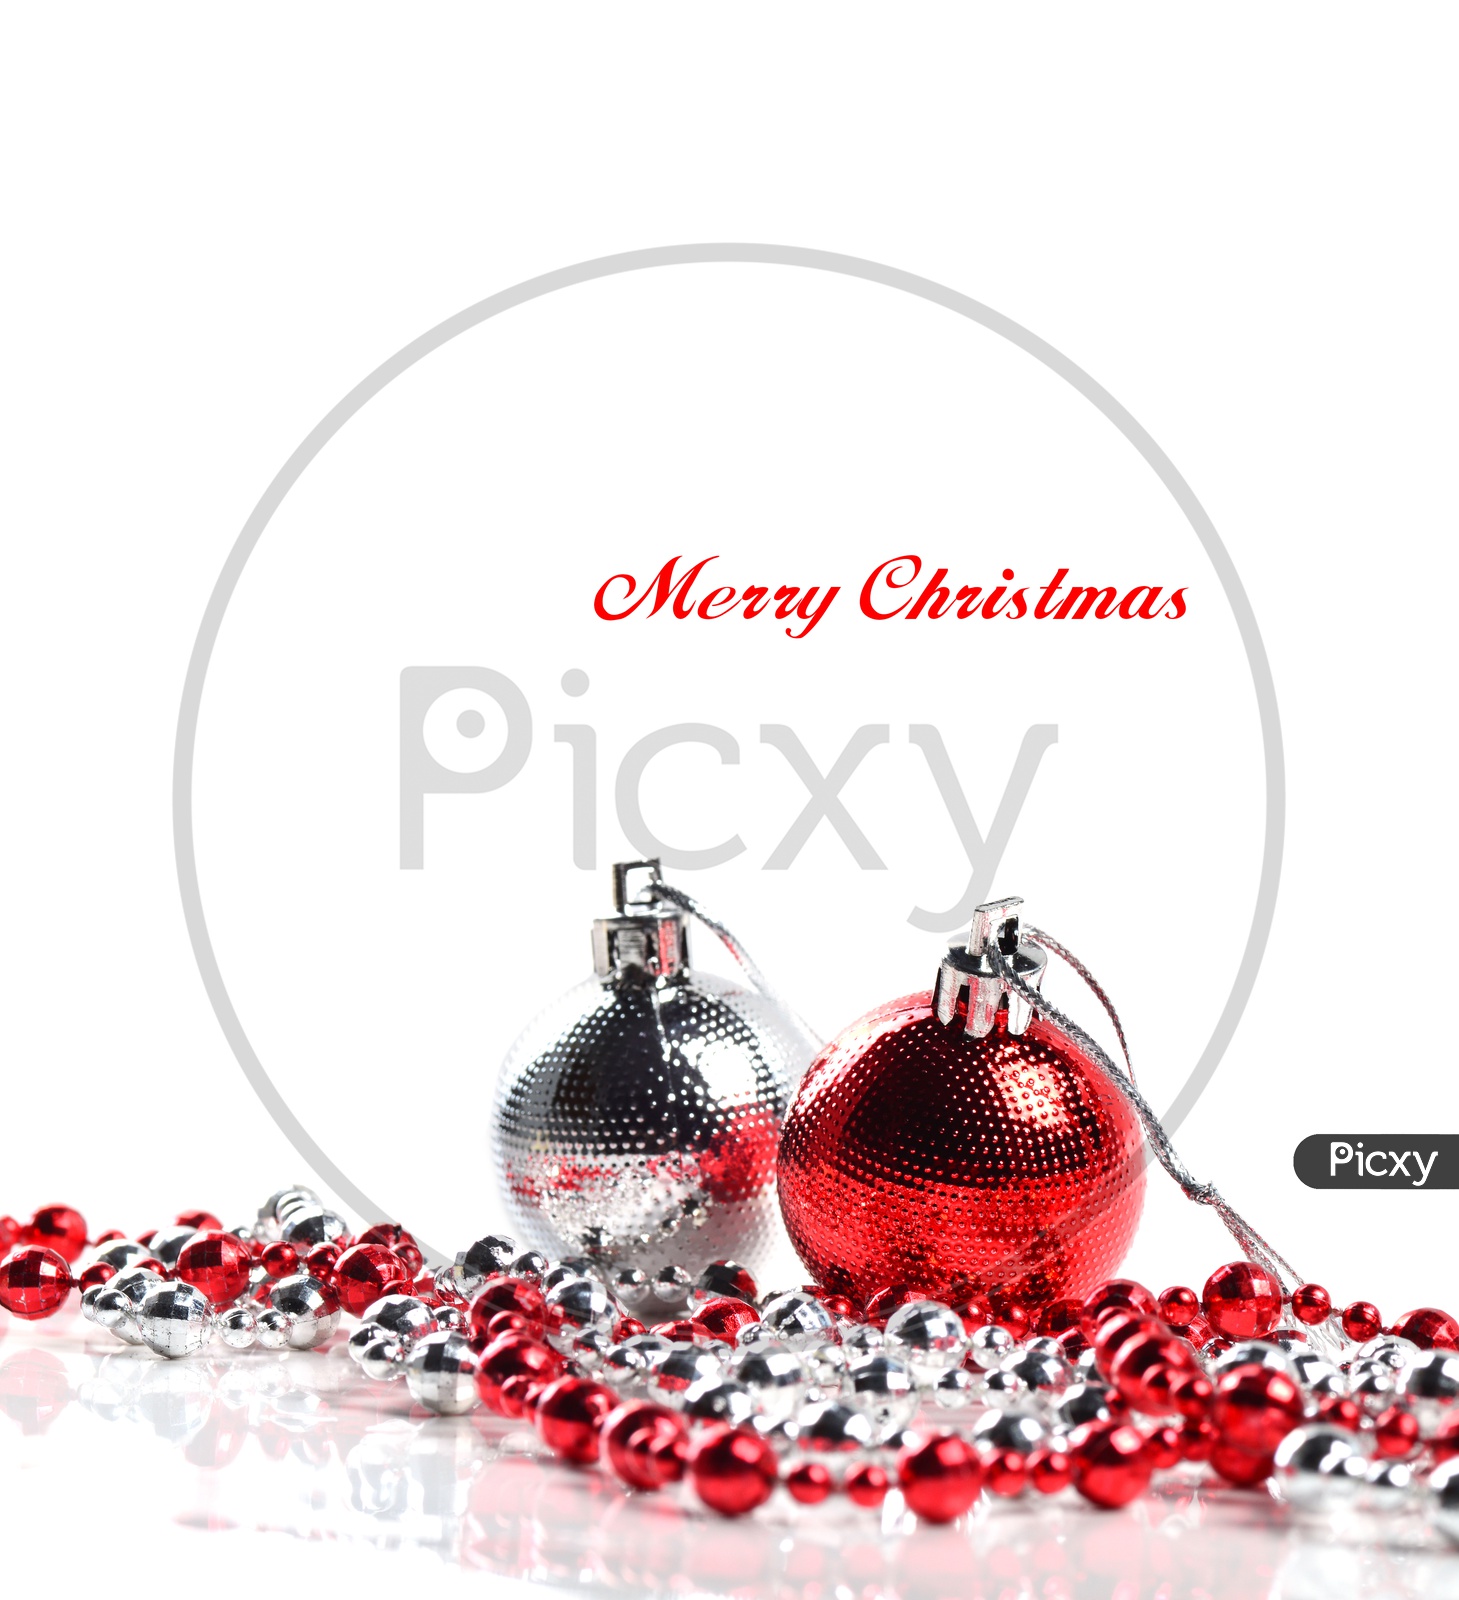 Christmas Tree Decoration Balls, Ornaments  And Chains on an Isolated White Background